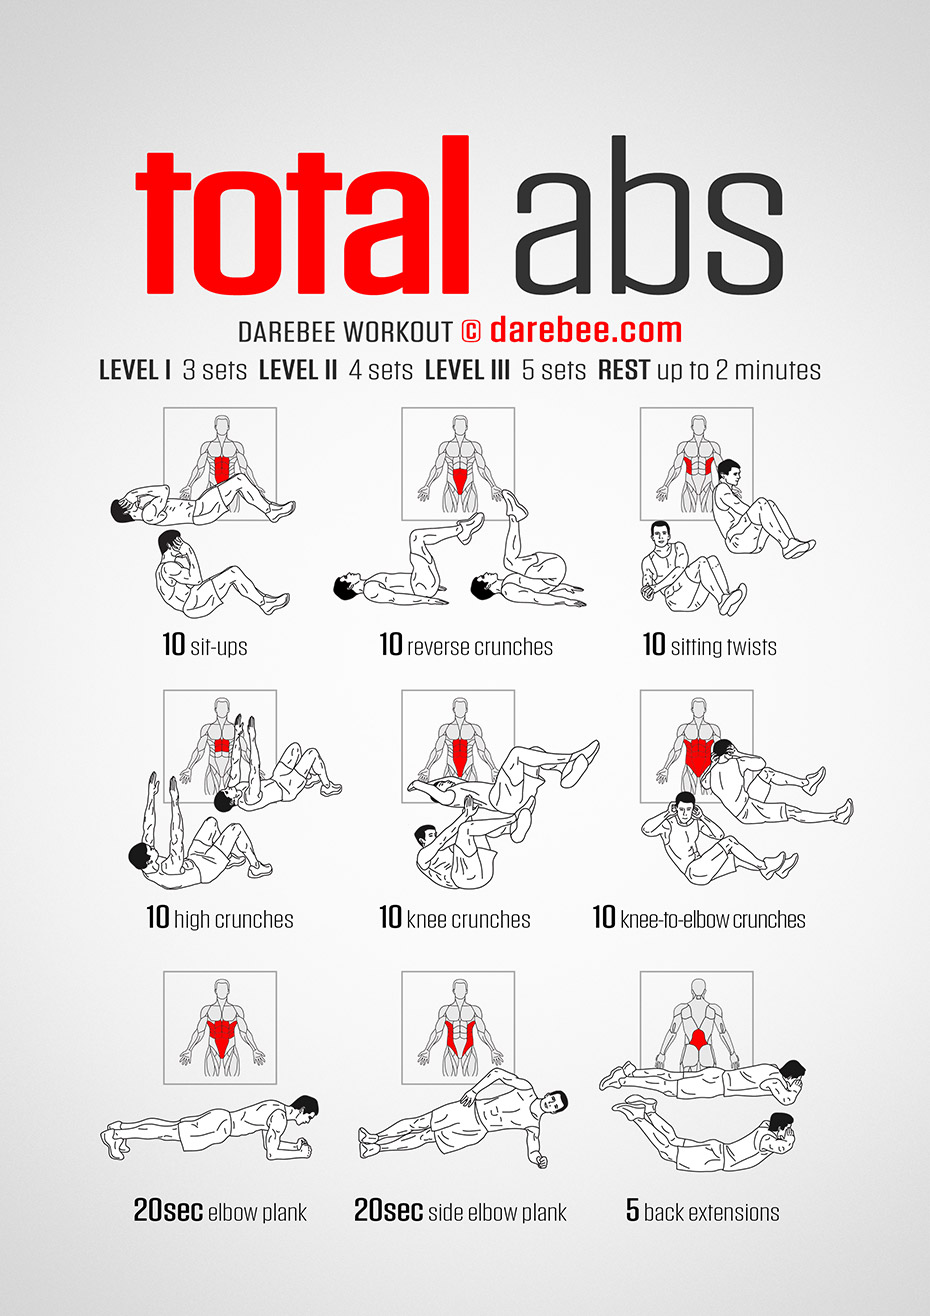 Total Abs is a DAREBEE home fitness no-equipment abdominal muscles workout that helps you develop strong abs and a strong core.